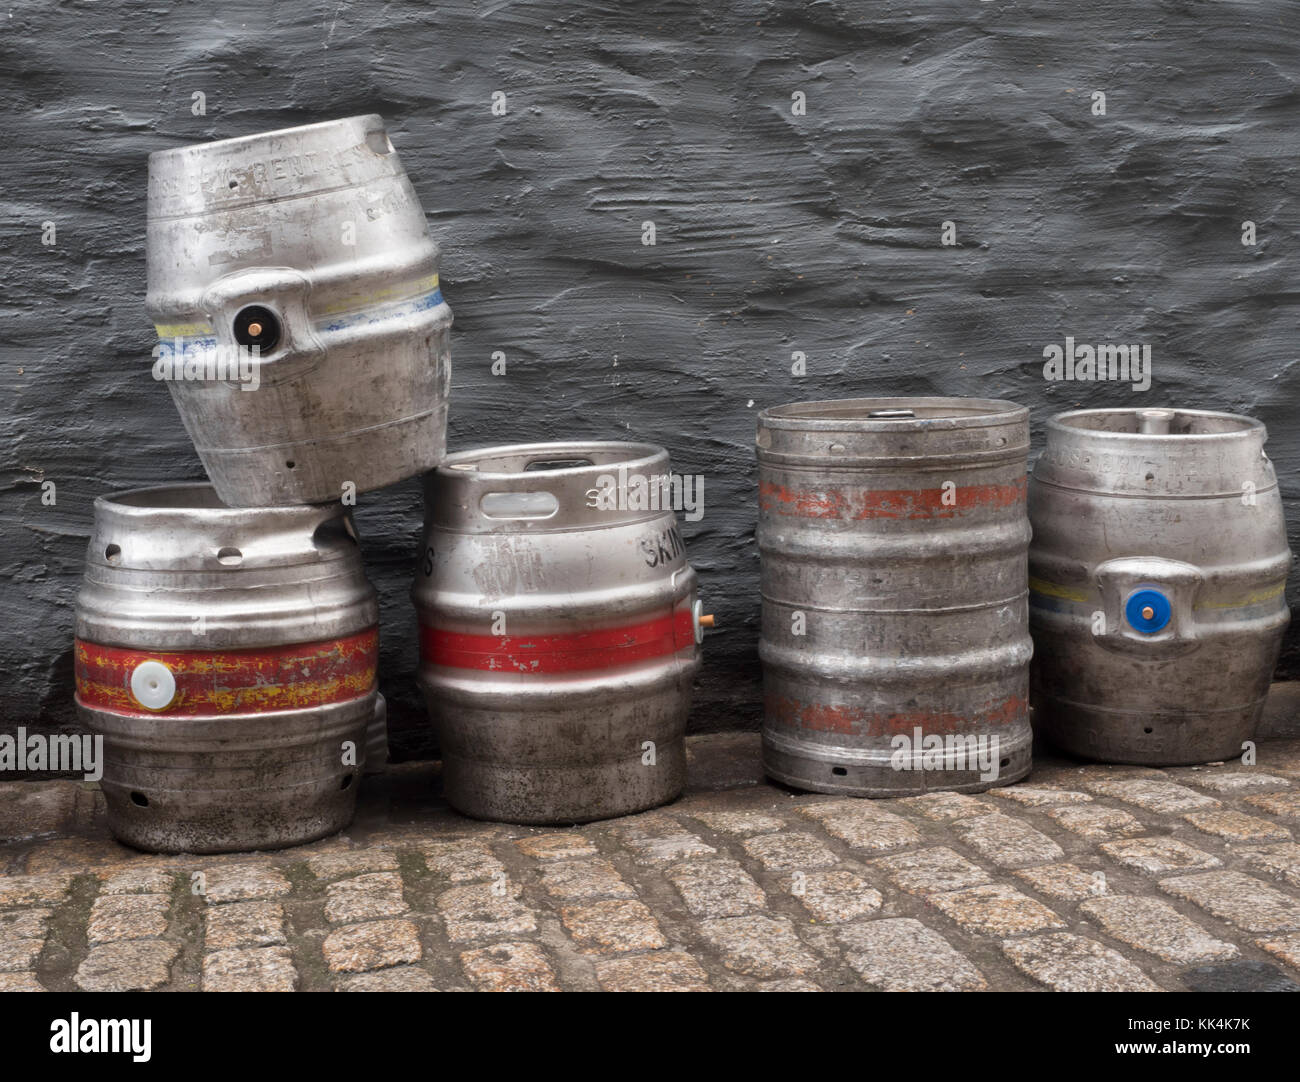 Discarded modern beer barrels (kegs) on a public street with cobble stones. Stock Photo